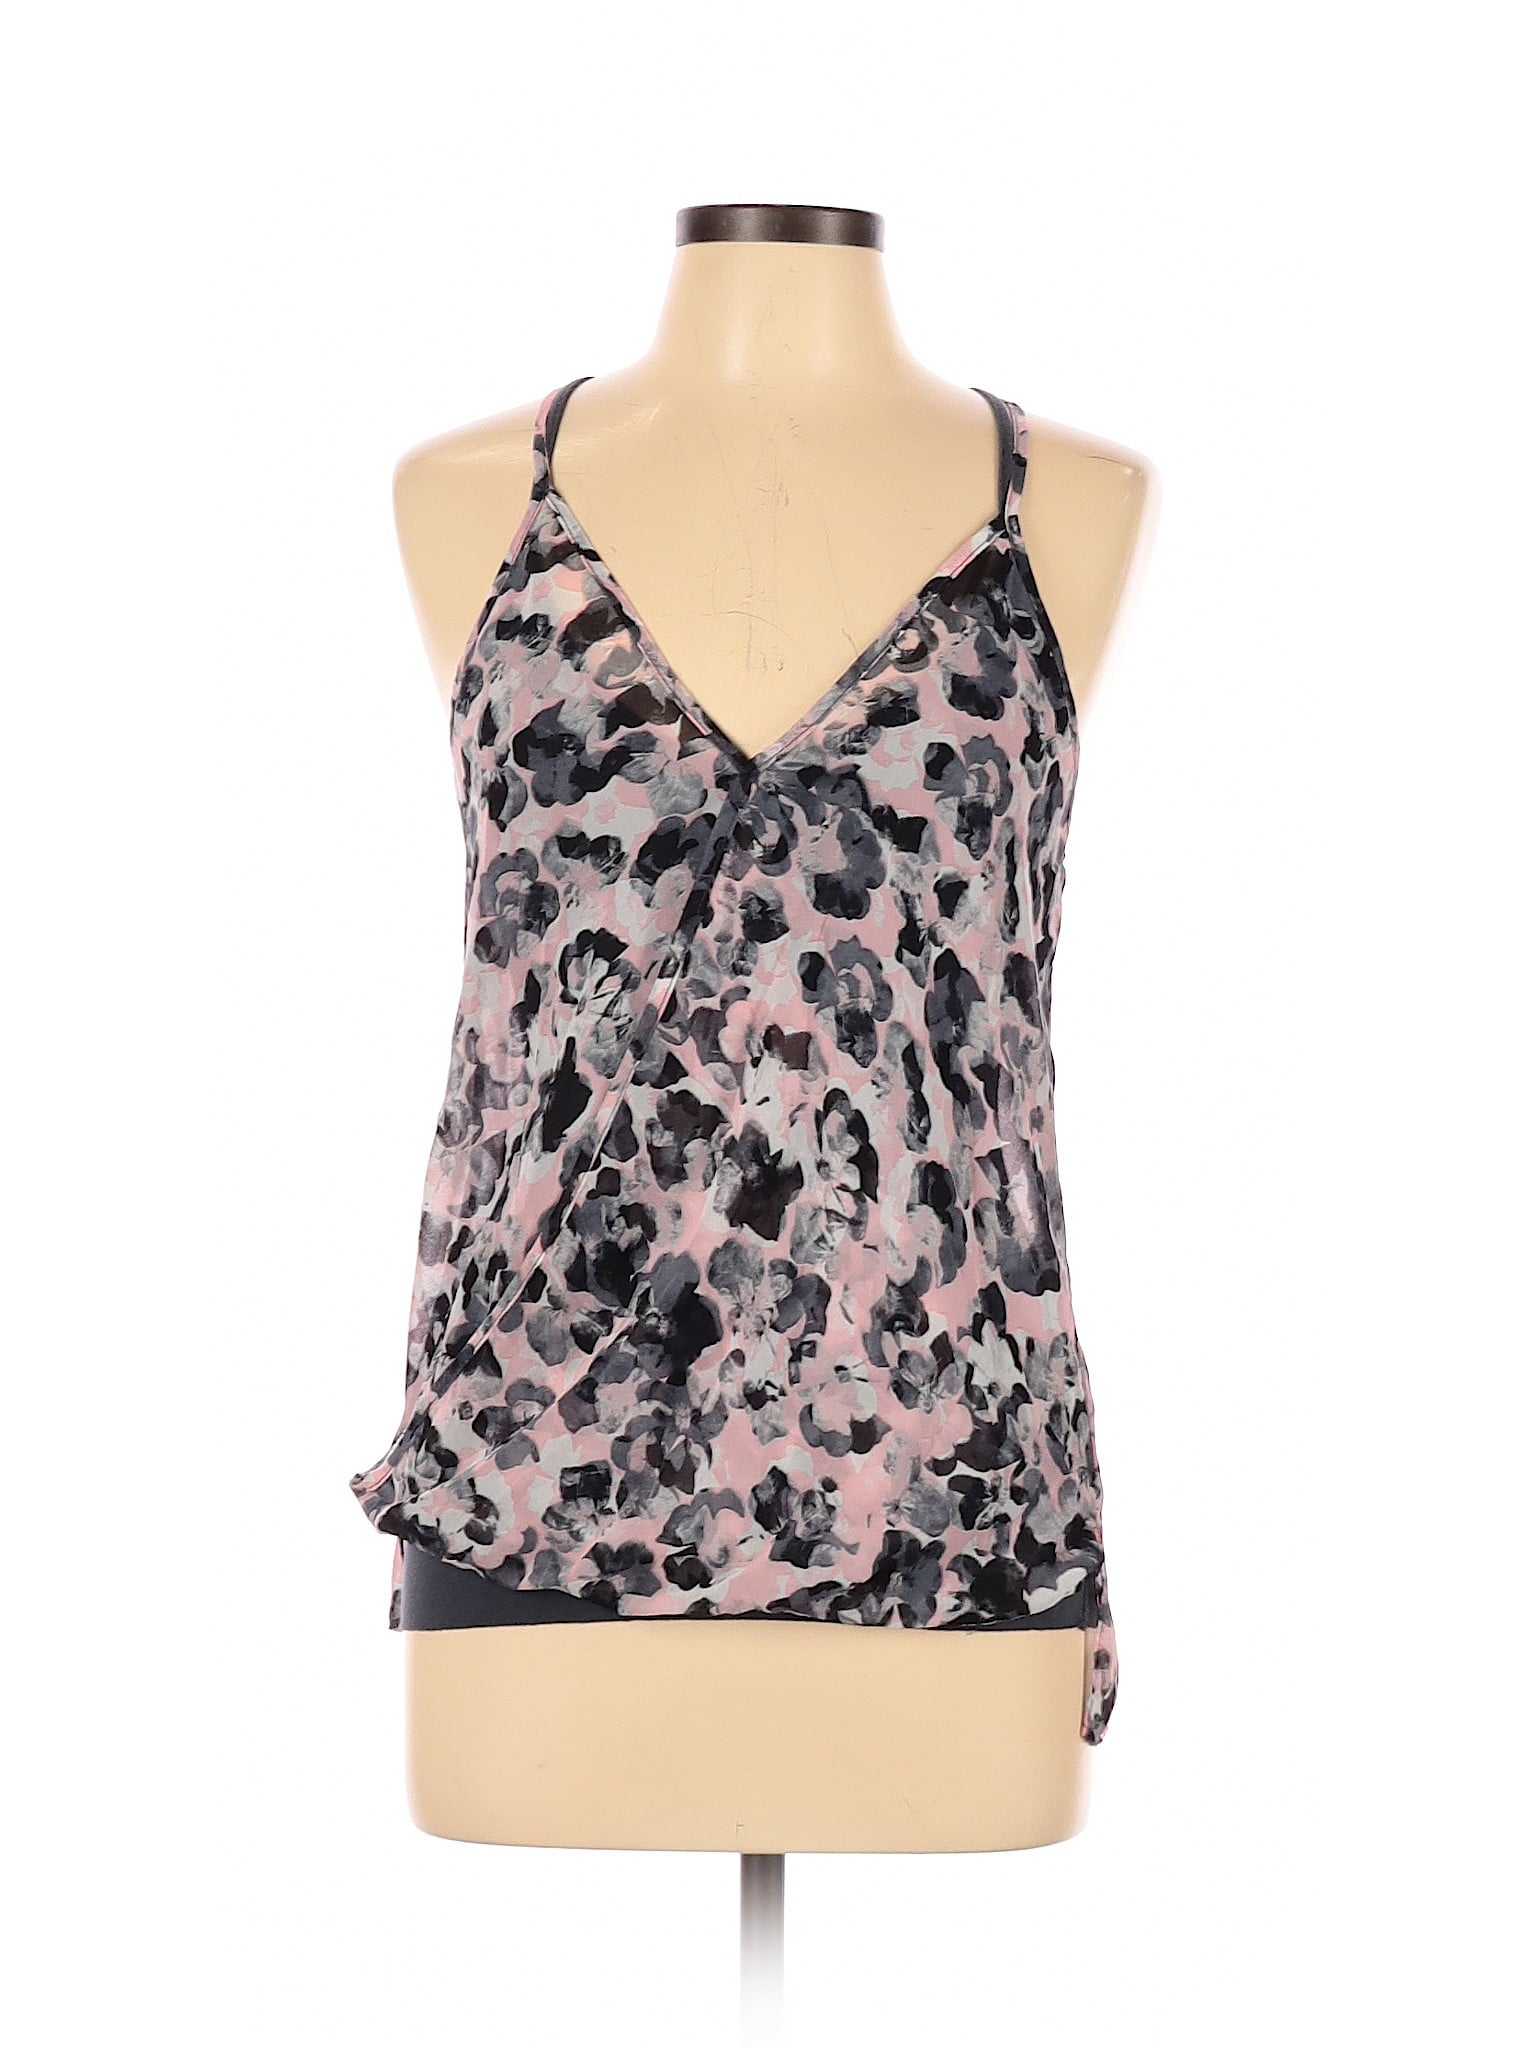 Bailey 44 - Pre-Owned Bailey 44 Women's Size S Sleeveless Blouse ...